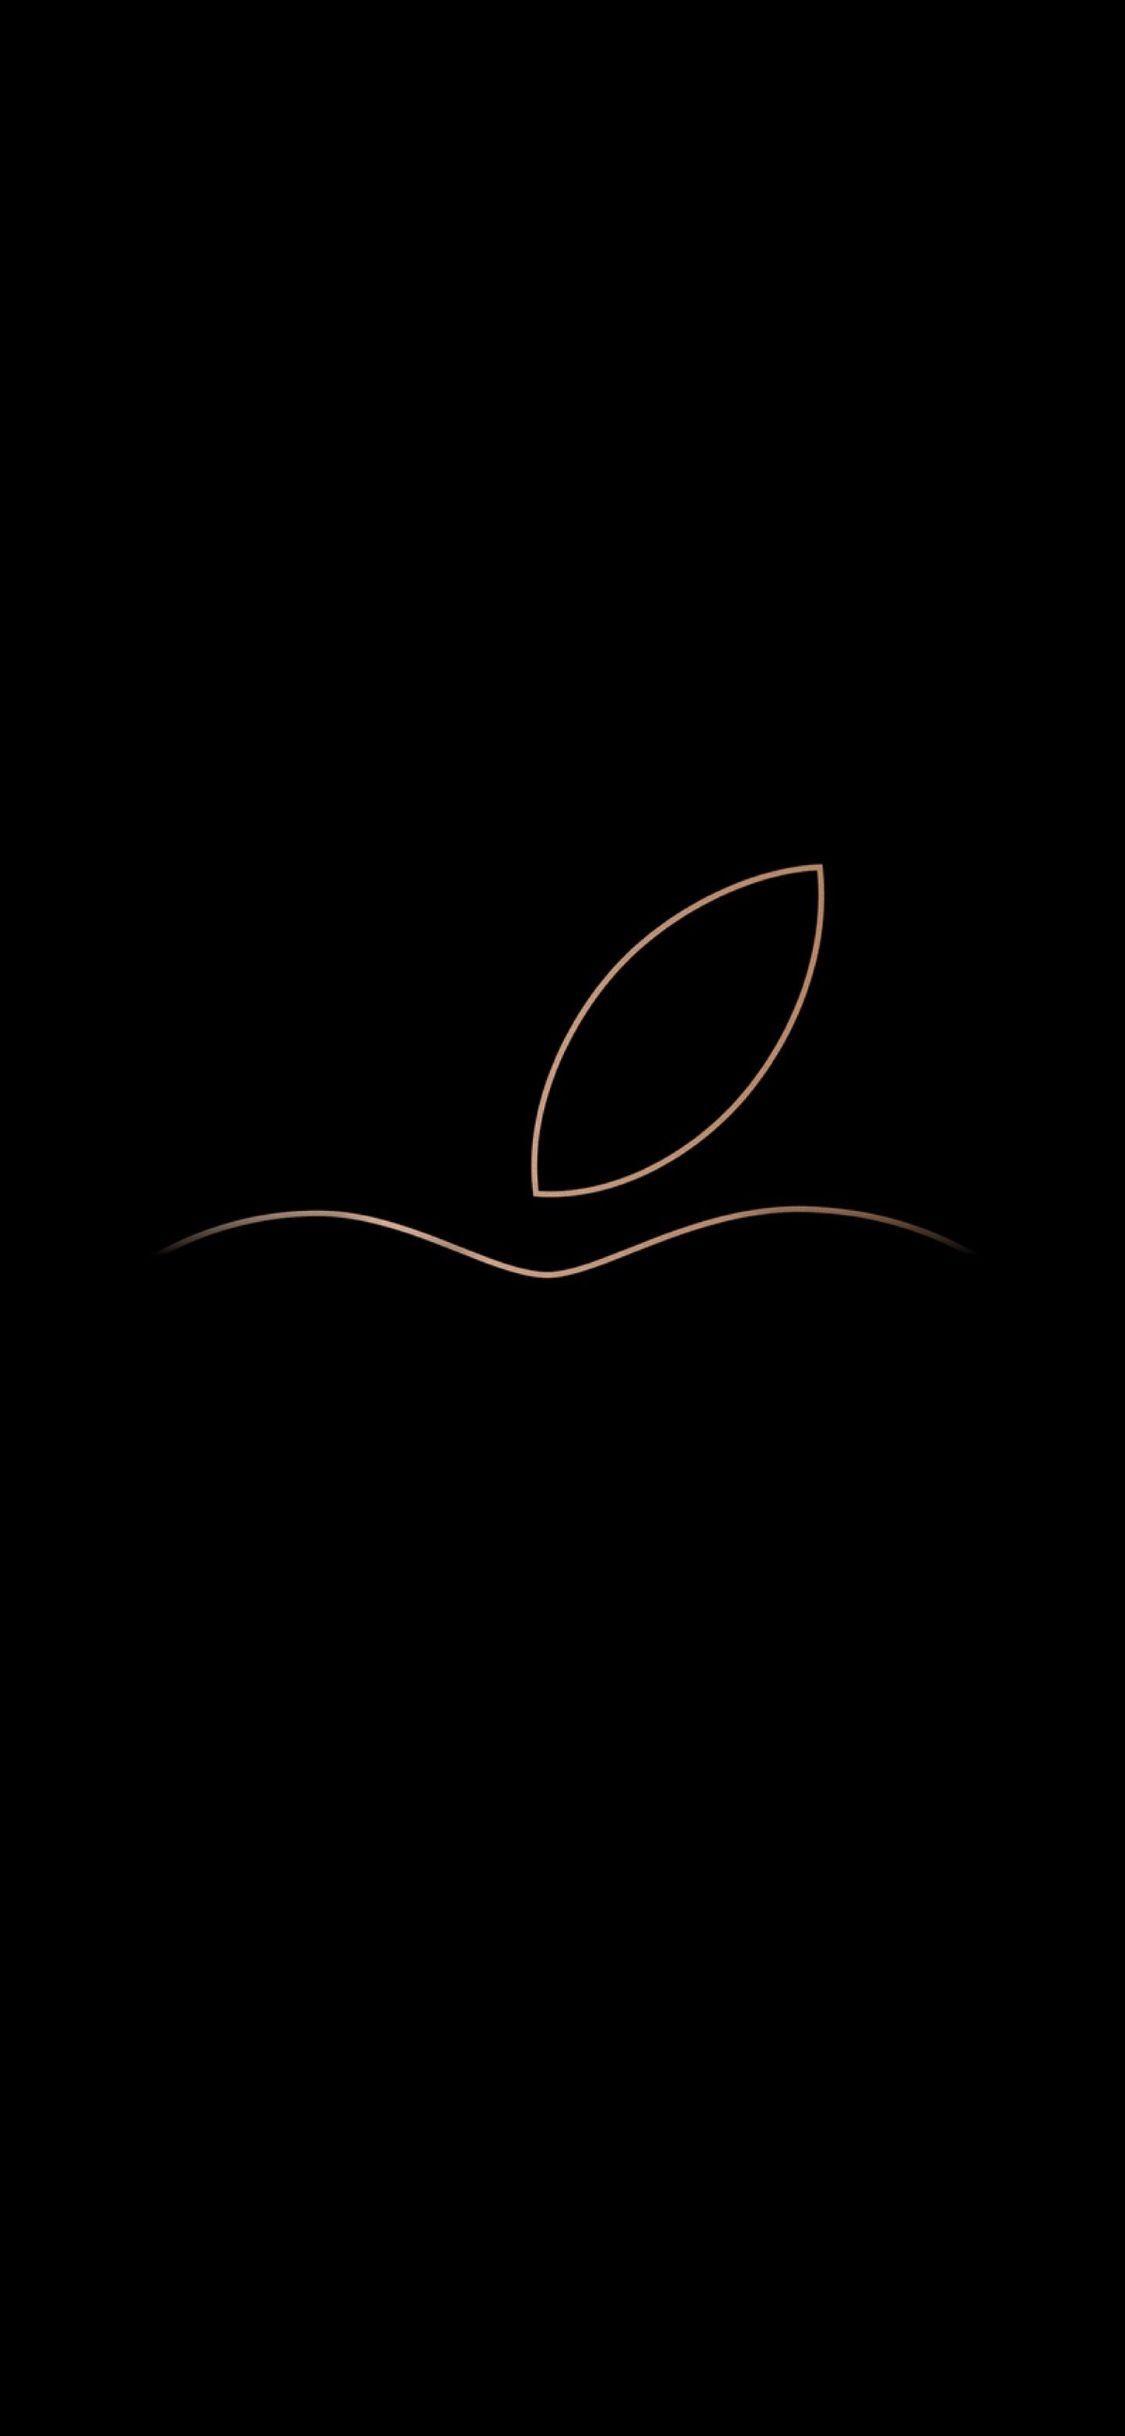 New Apple Logo Wallpapers Top Free New Apple Logo Backgrounds Wallpaperaccess